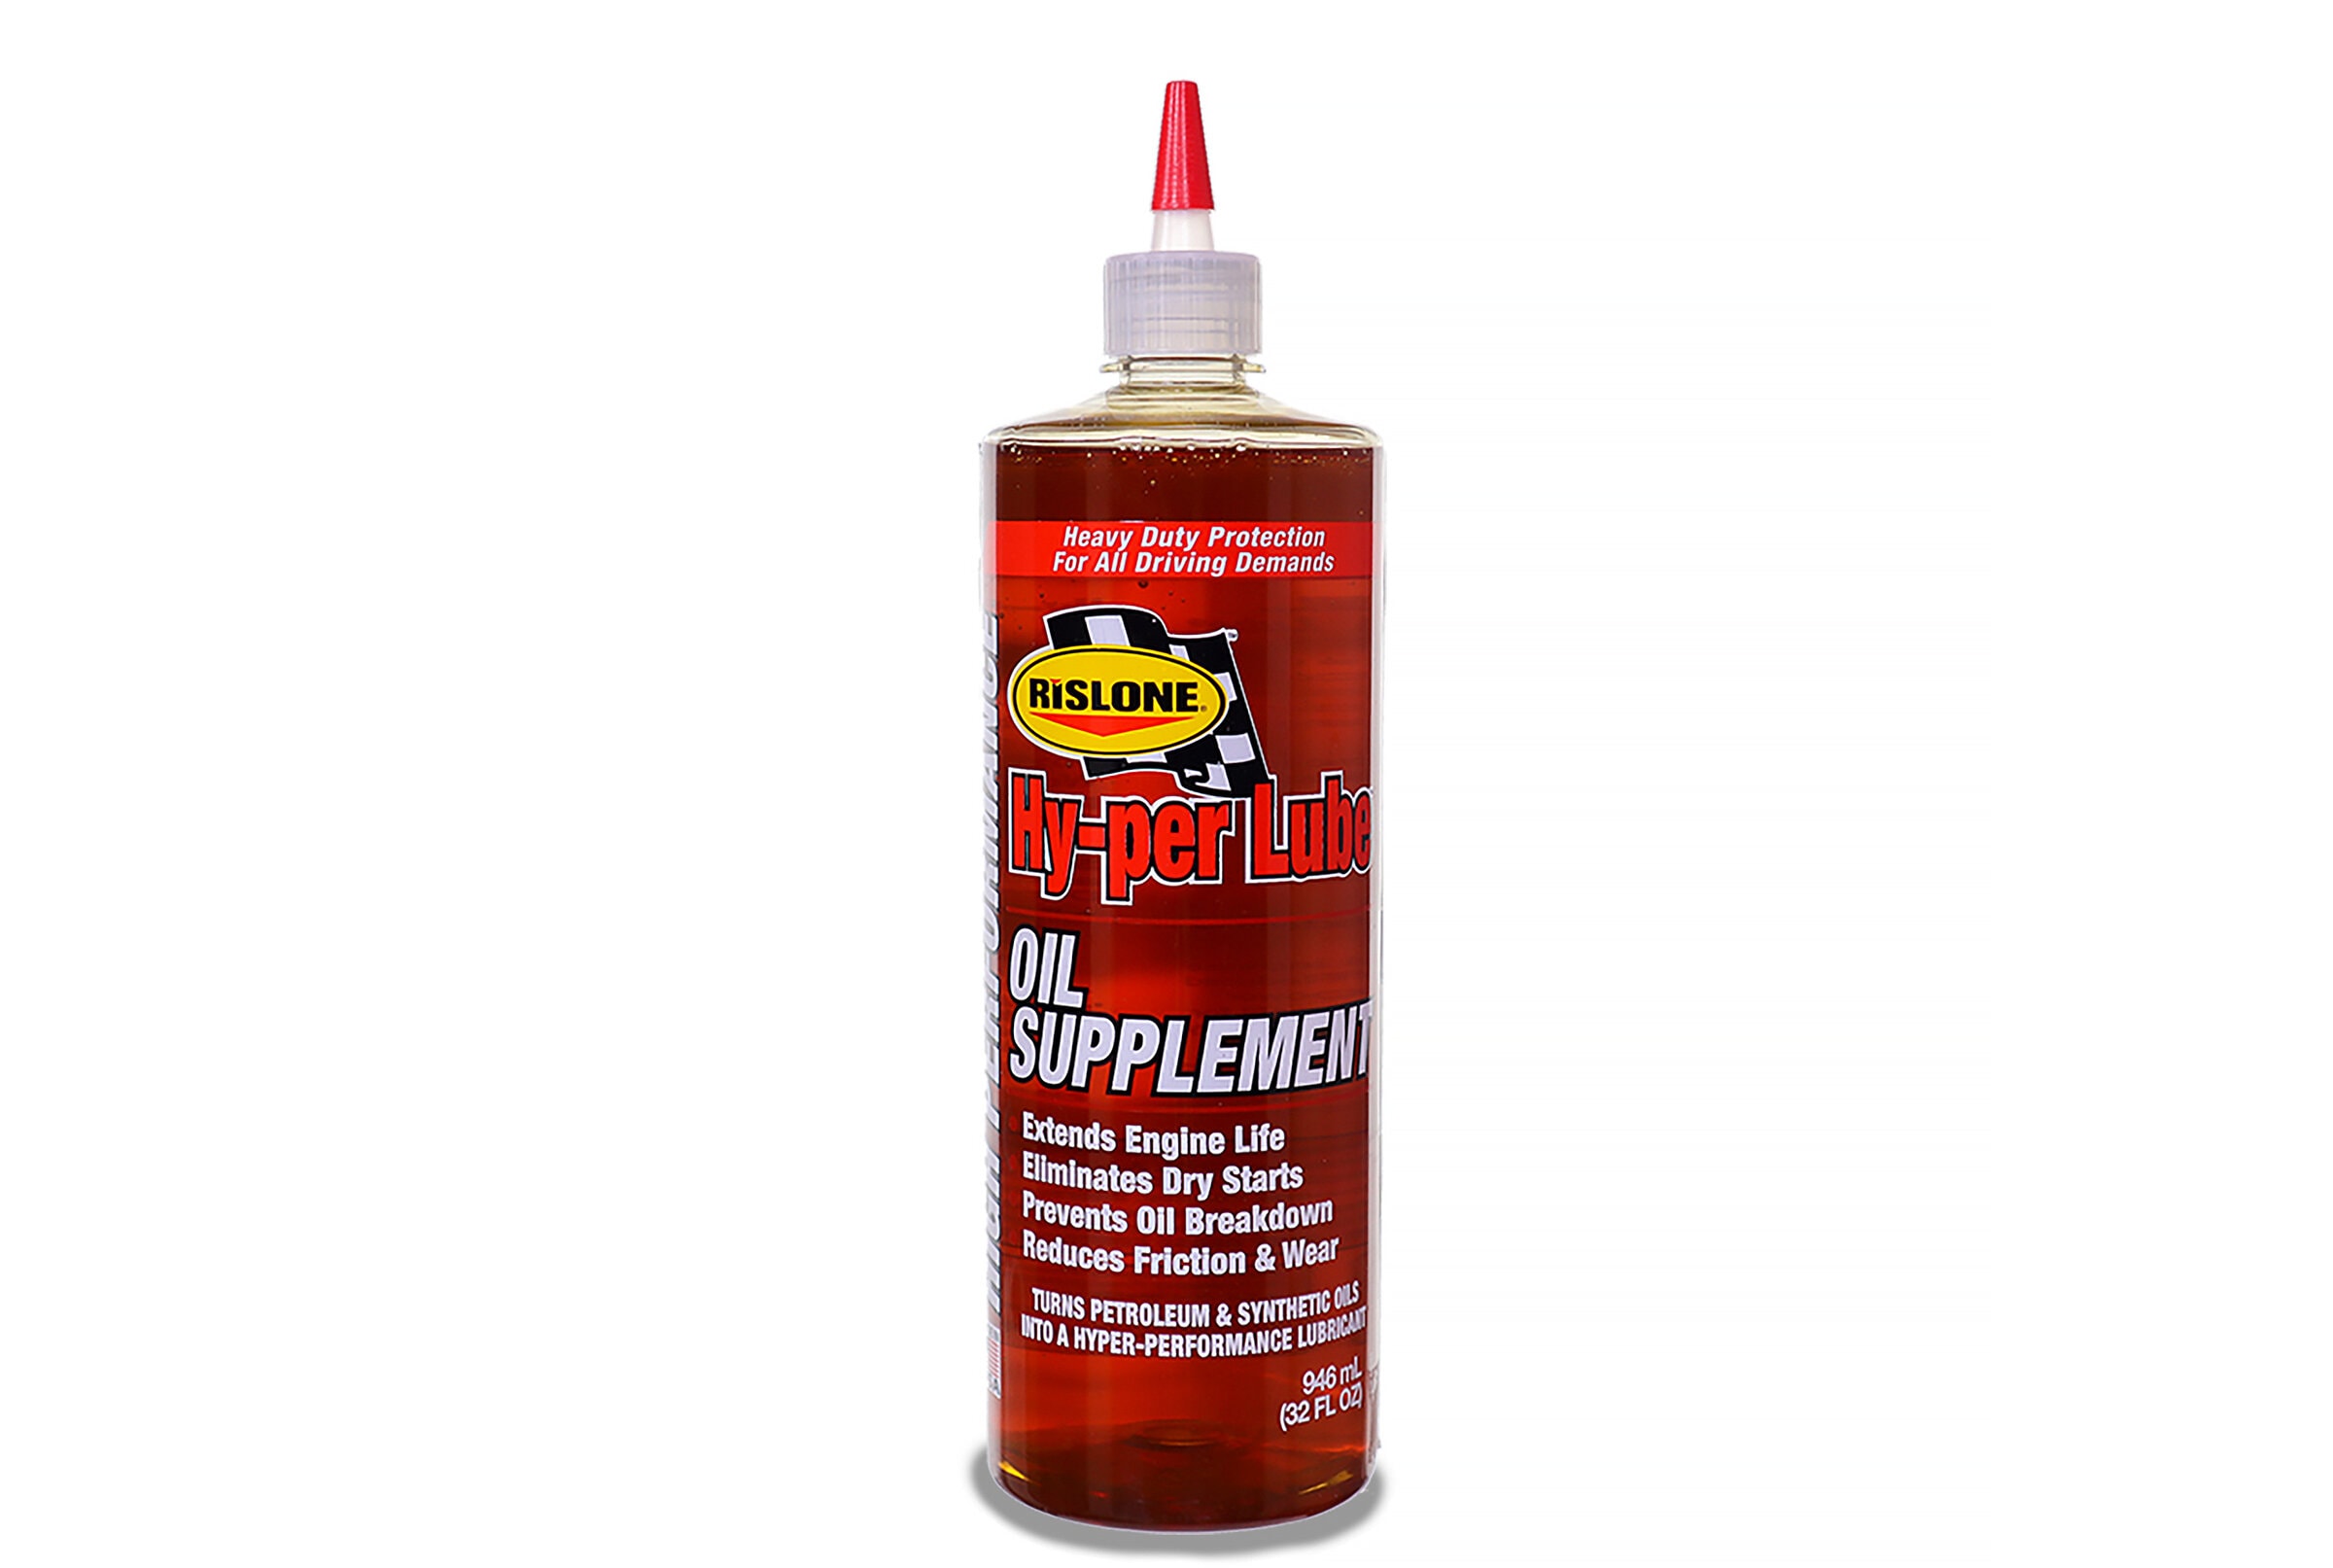 Hy-Per Lube Oil Supplement, 946 ml